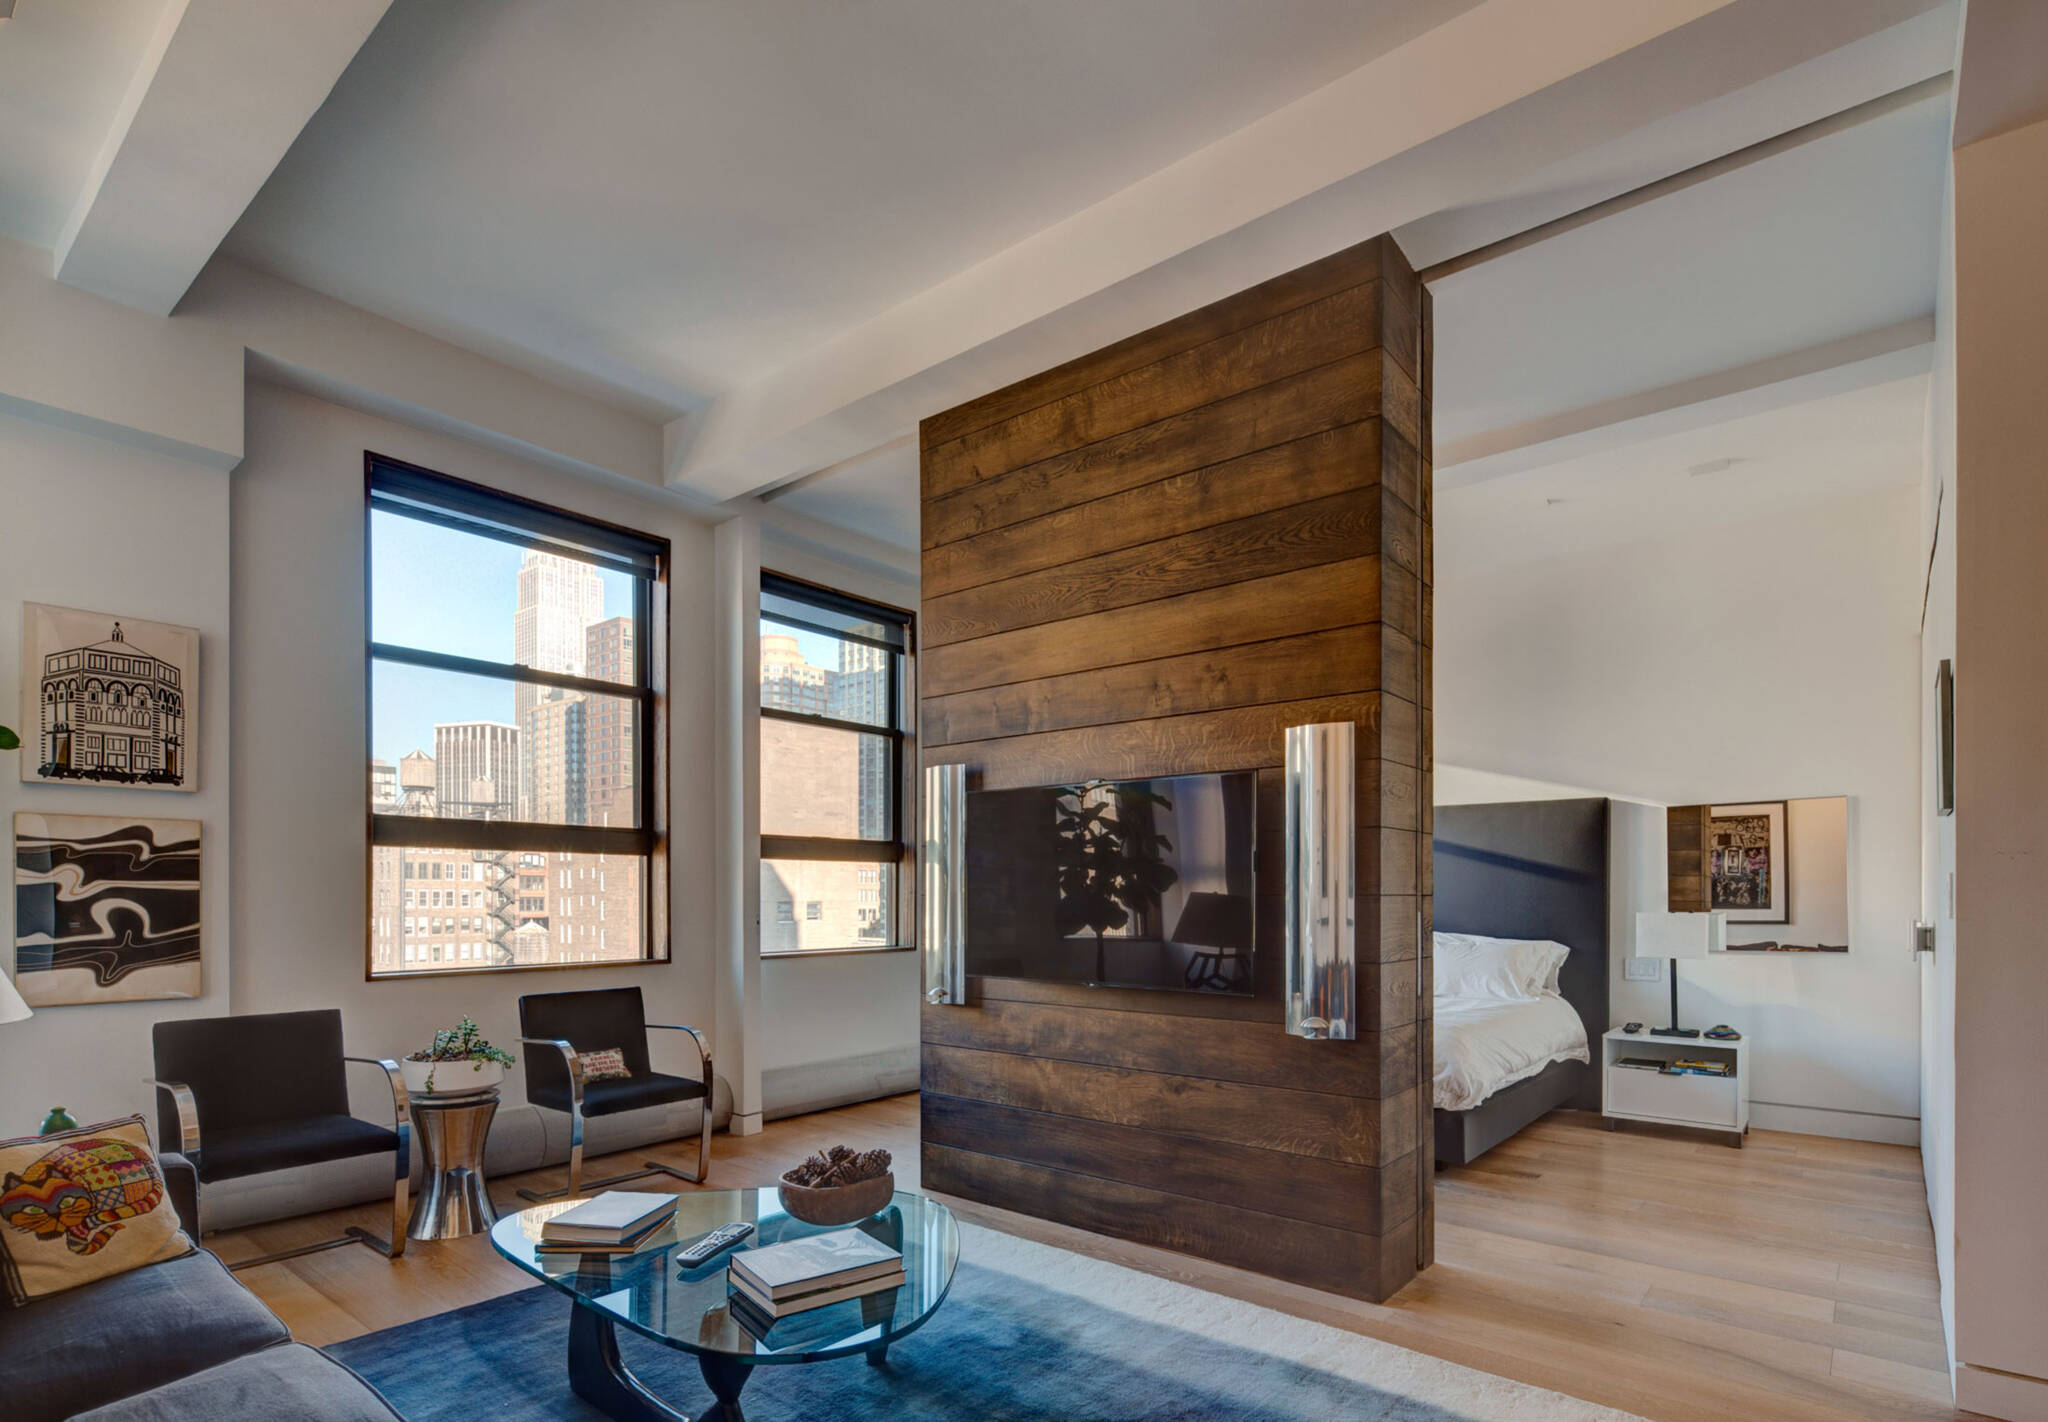 Open space of the residence renovation project in the Chelsea Mews building on the Flatiron District in Manhattan, New York City designed by the architecture studio Danny Forster & Architecture